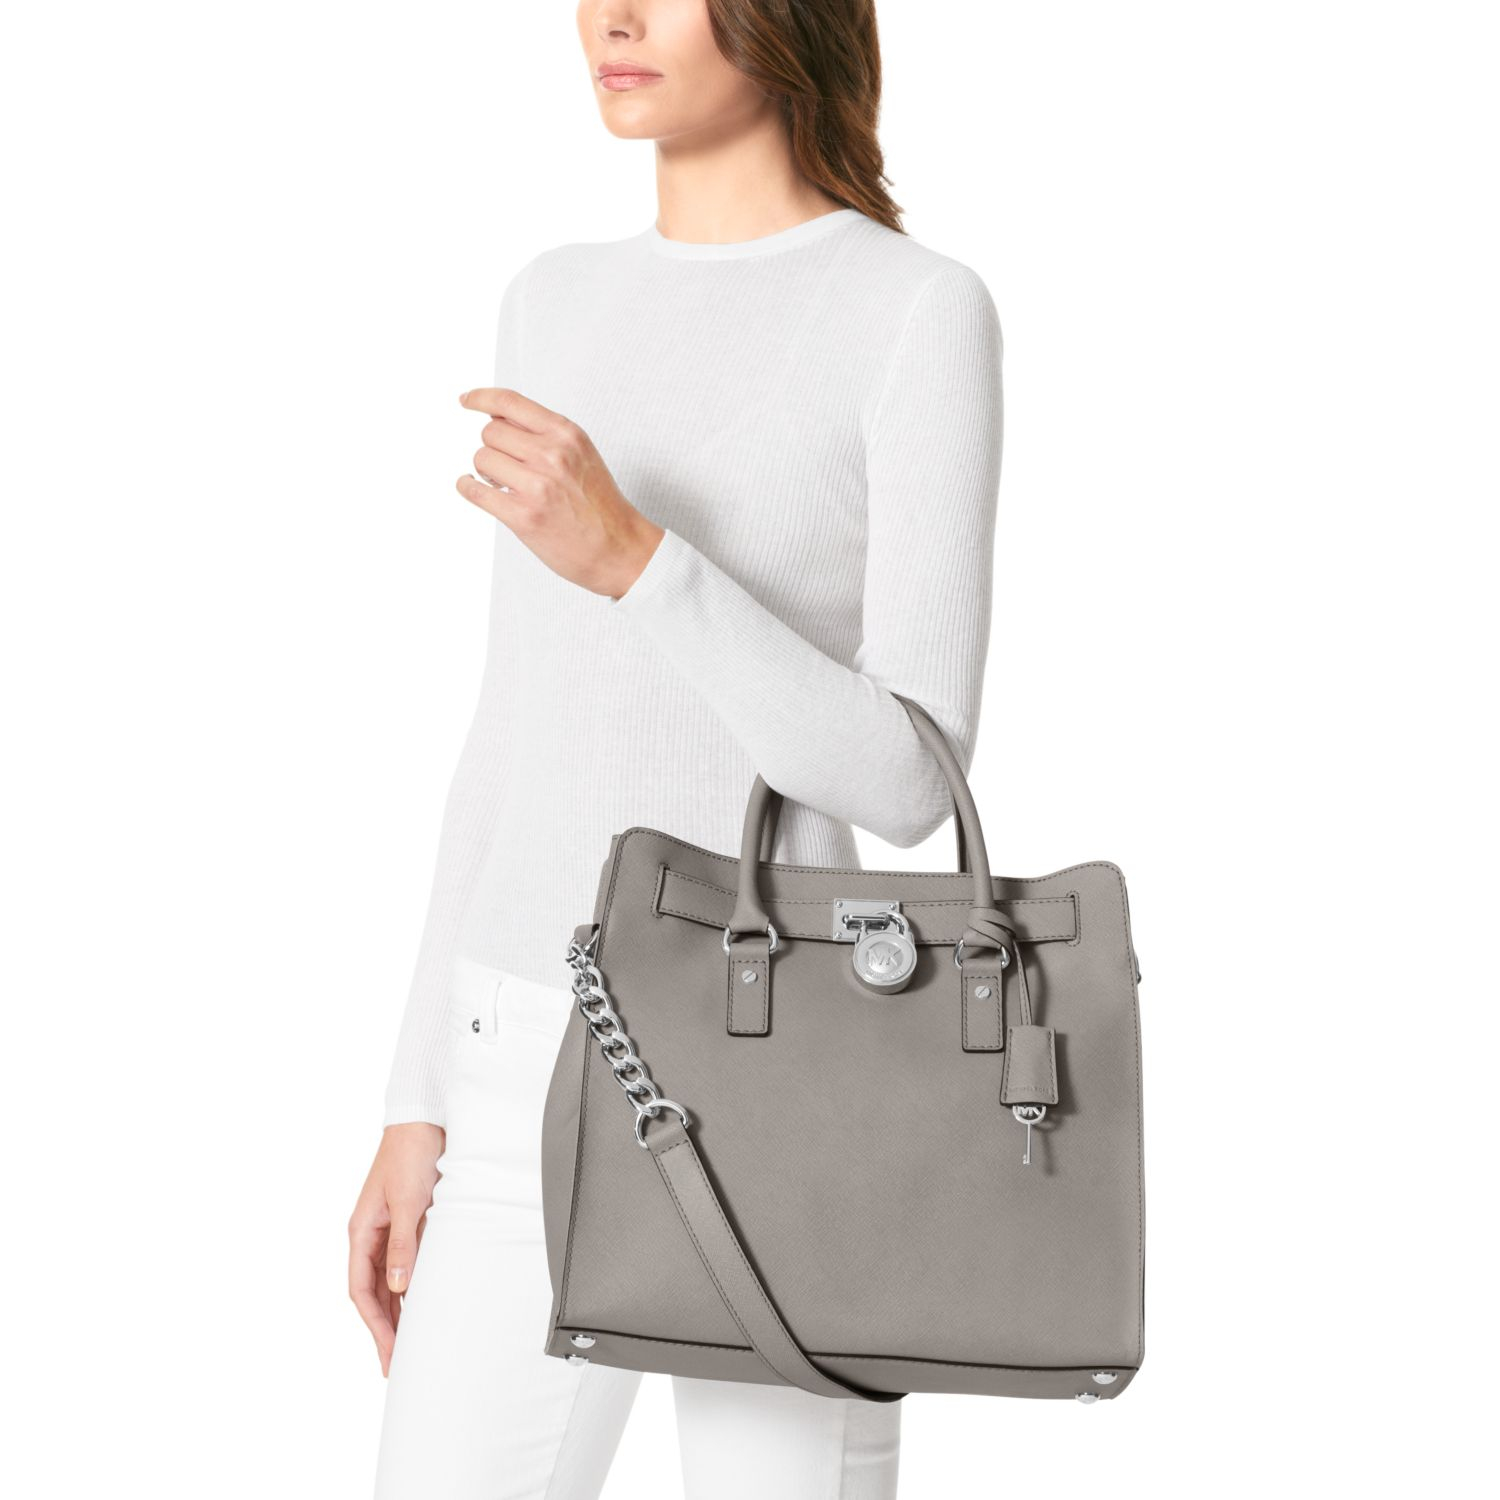 michael kors white hamilton saffiano leather large tote product 1 24989460 1 431402852 normal